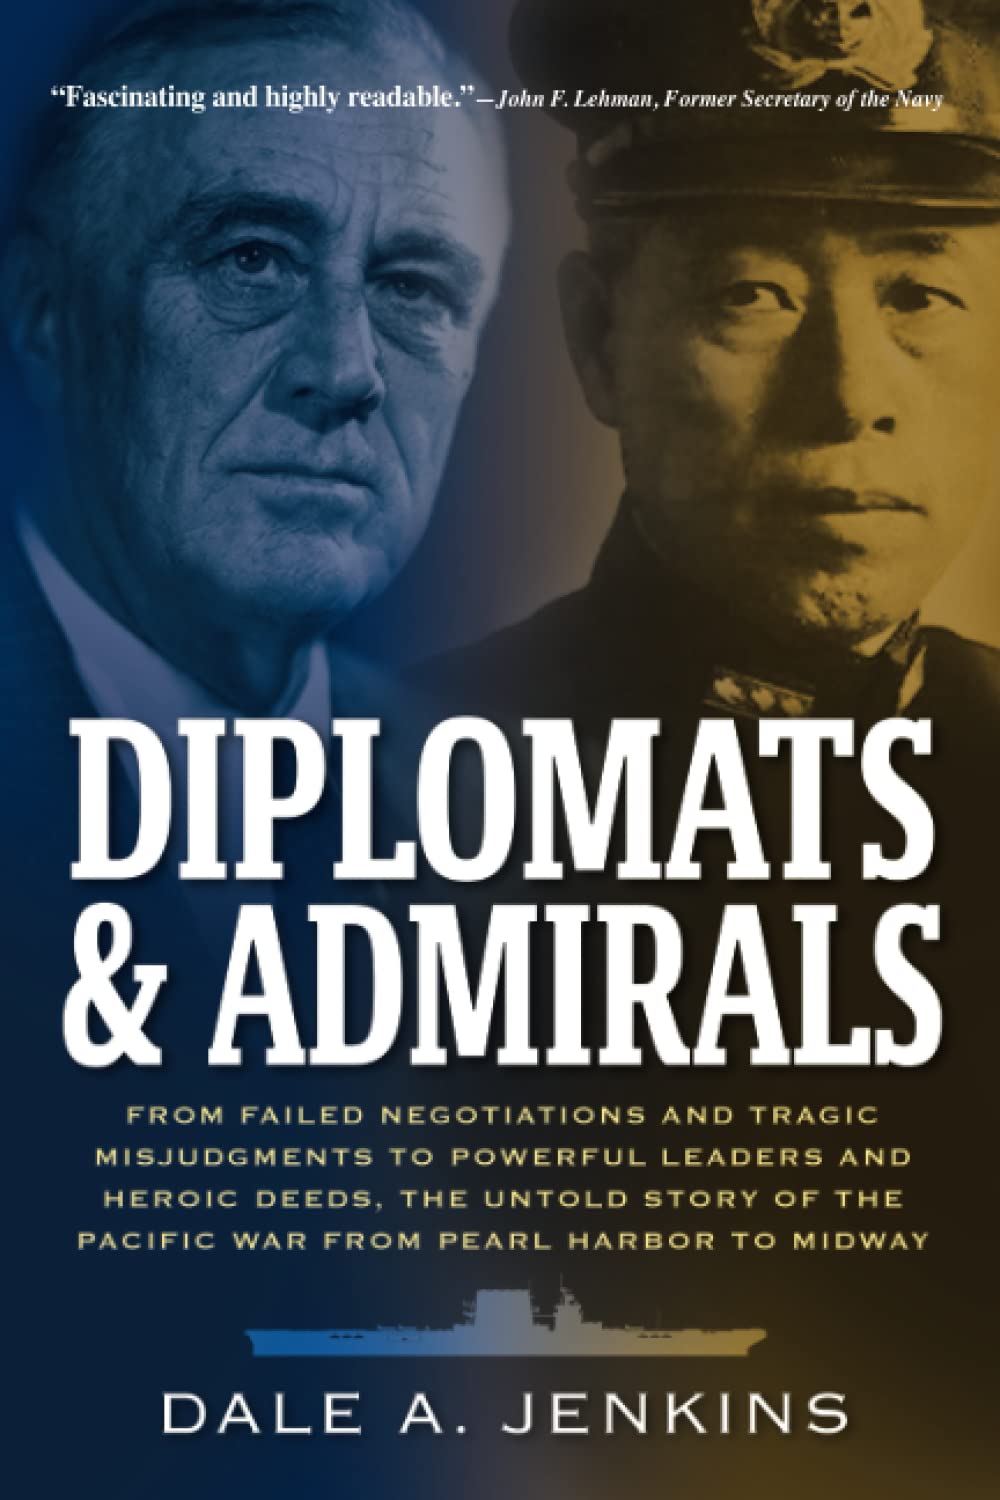 Diplomats and Admirals by Dale Jenkins